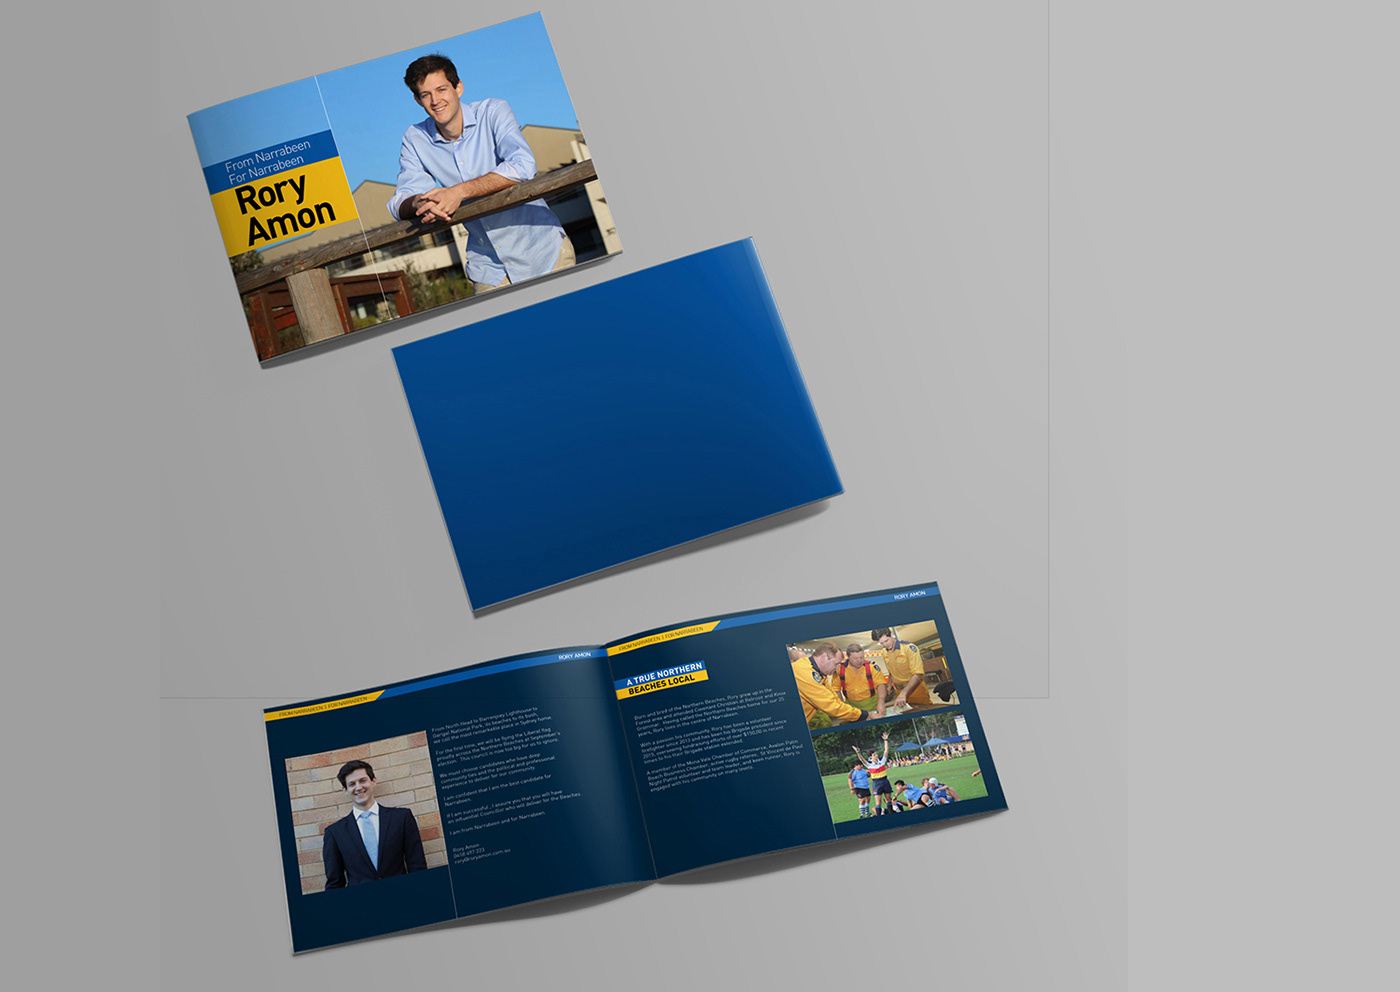 books catalogues company profile Illustrator photoshop Layout Design typesetting Adobe Indesing annual reports